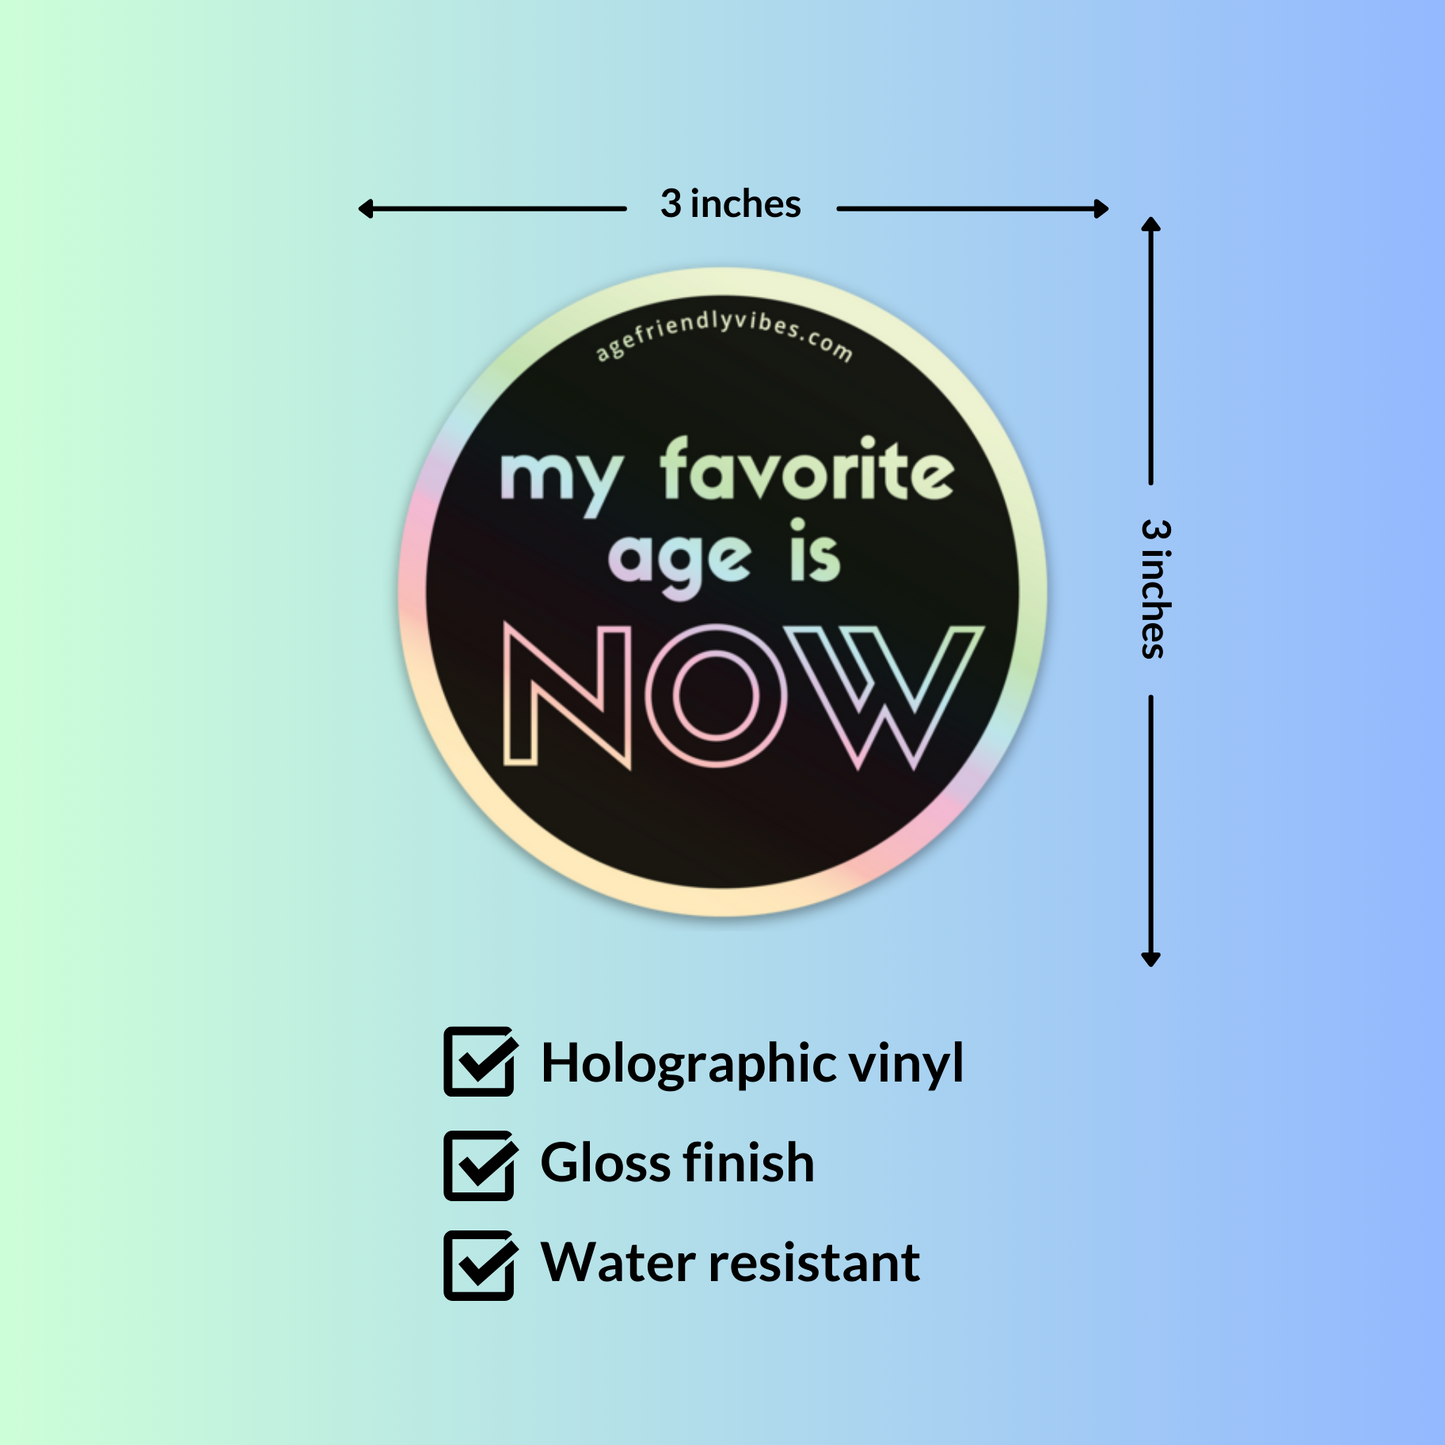 My Favorite Age is Now Sticker